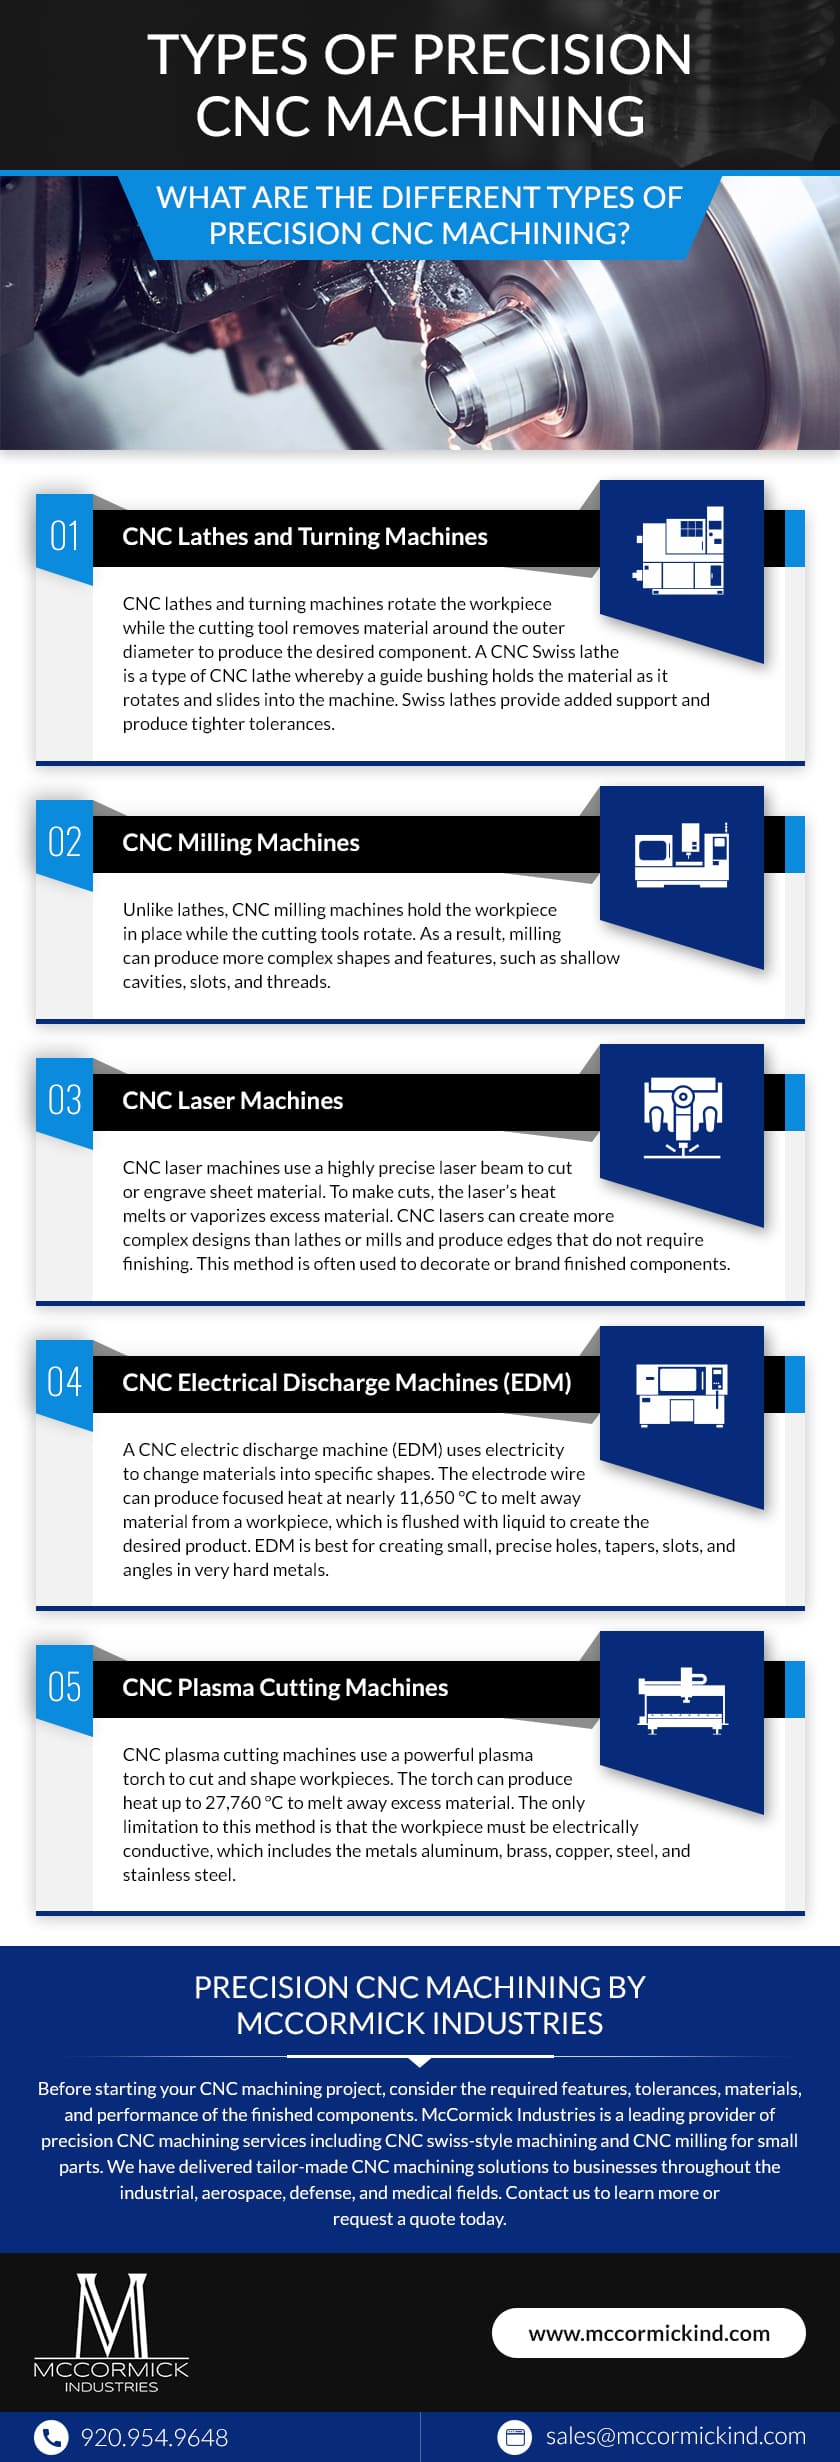 Types of Precision CNC Machining infographic